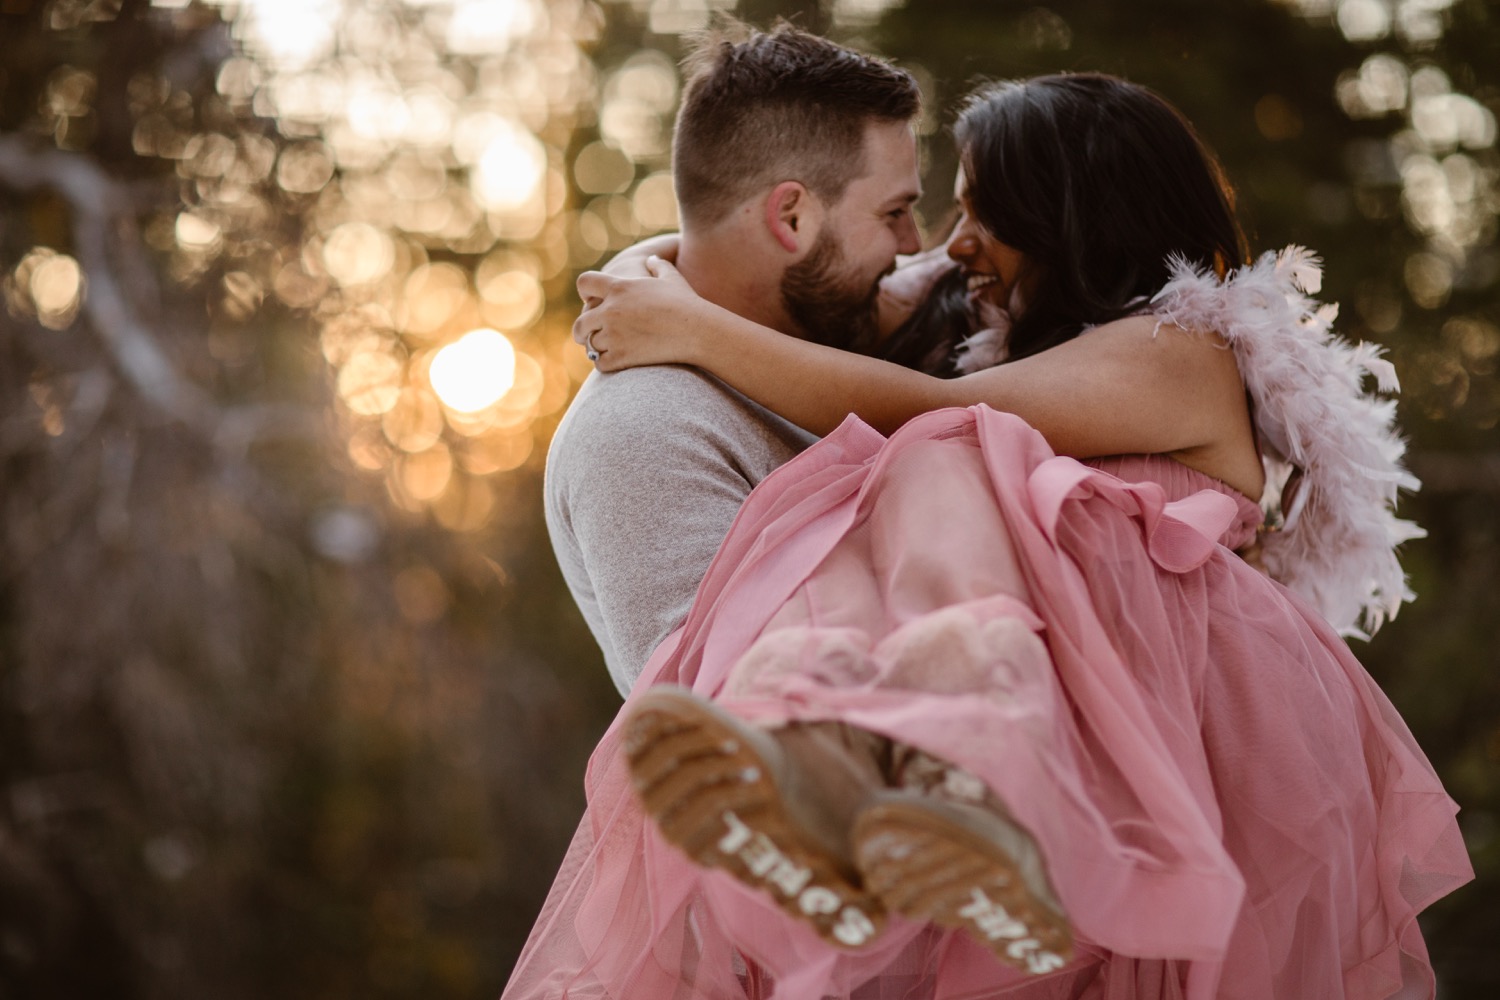 An Epic Pink Dress For This Boho Adventure Winter Engagement Adventure Call it the Magic of Colorado, Dreamy Winter Wonderland Adventure in Rocky Mountains | Justyna E Butler Photography | Cinematic & Emotive Wedding, Elopements and Engagements for Non Traditional Couples